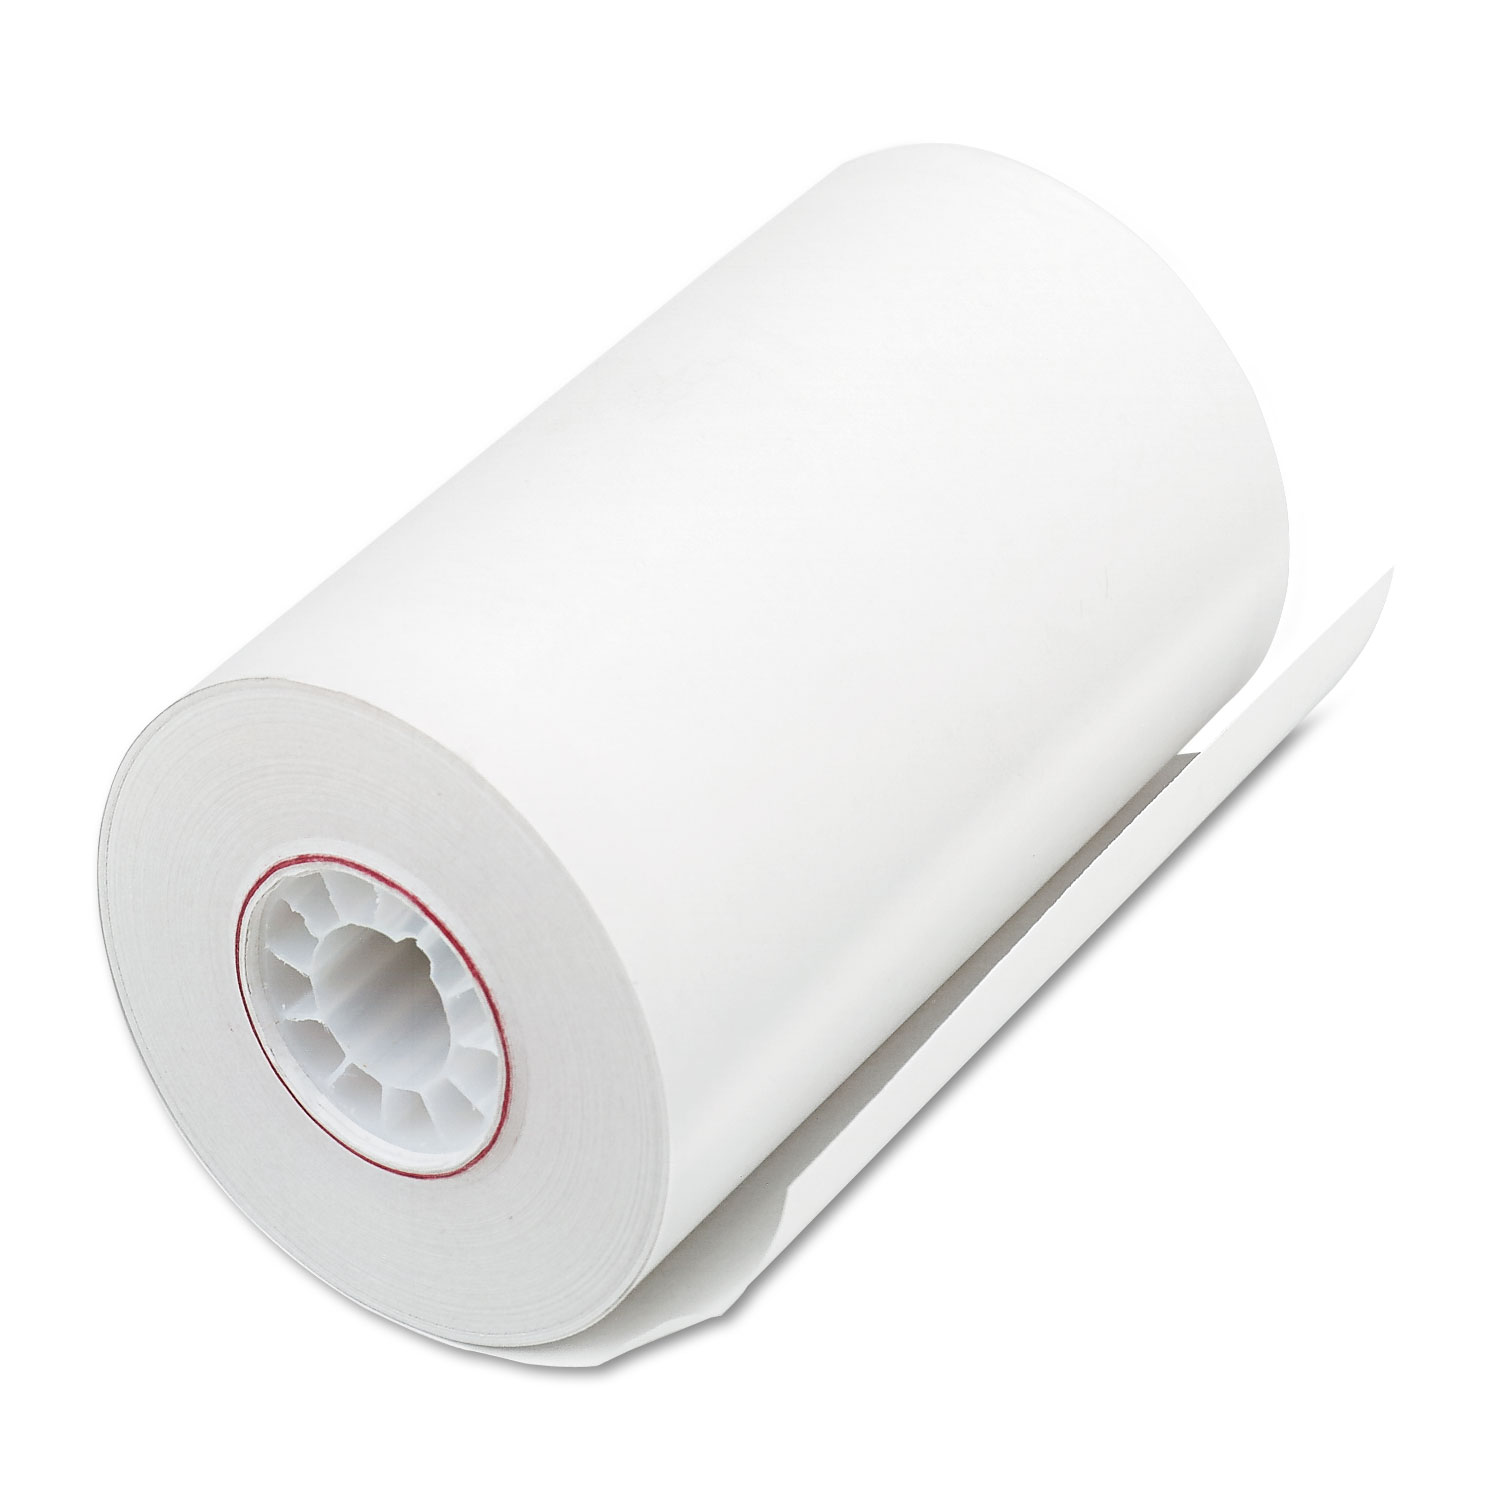 Direct Thermal Printing Thermal Paper Rolls, 3.13" x 90 ft, White, 72/Carton